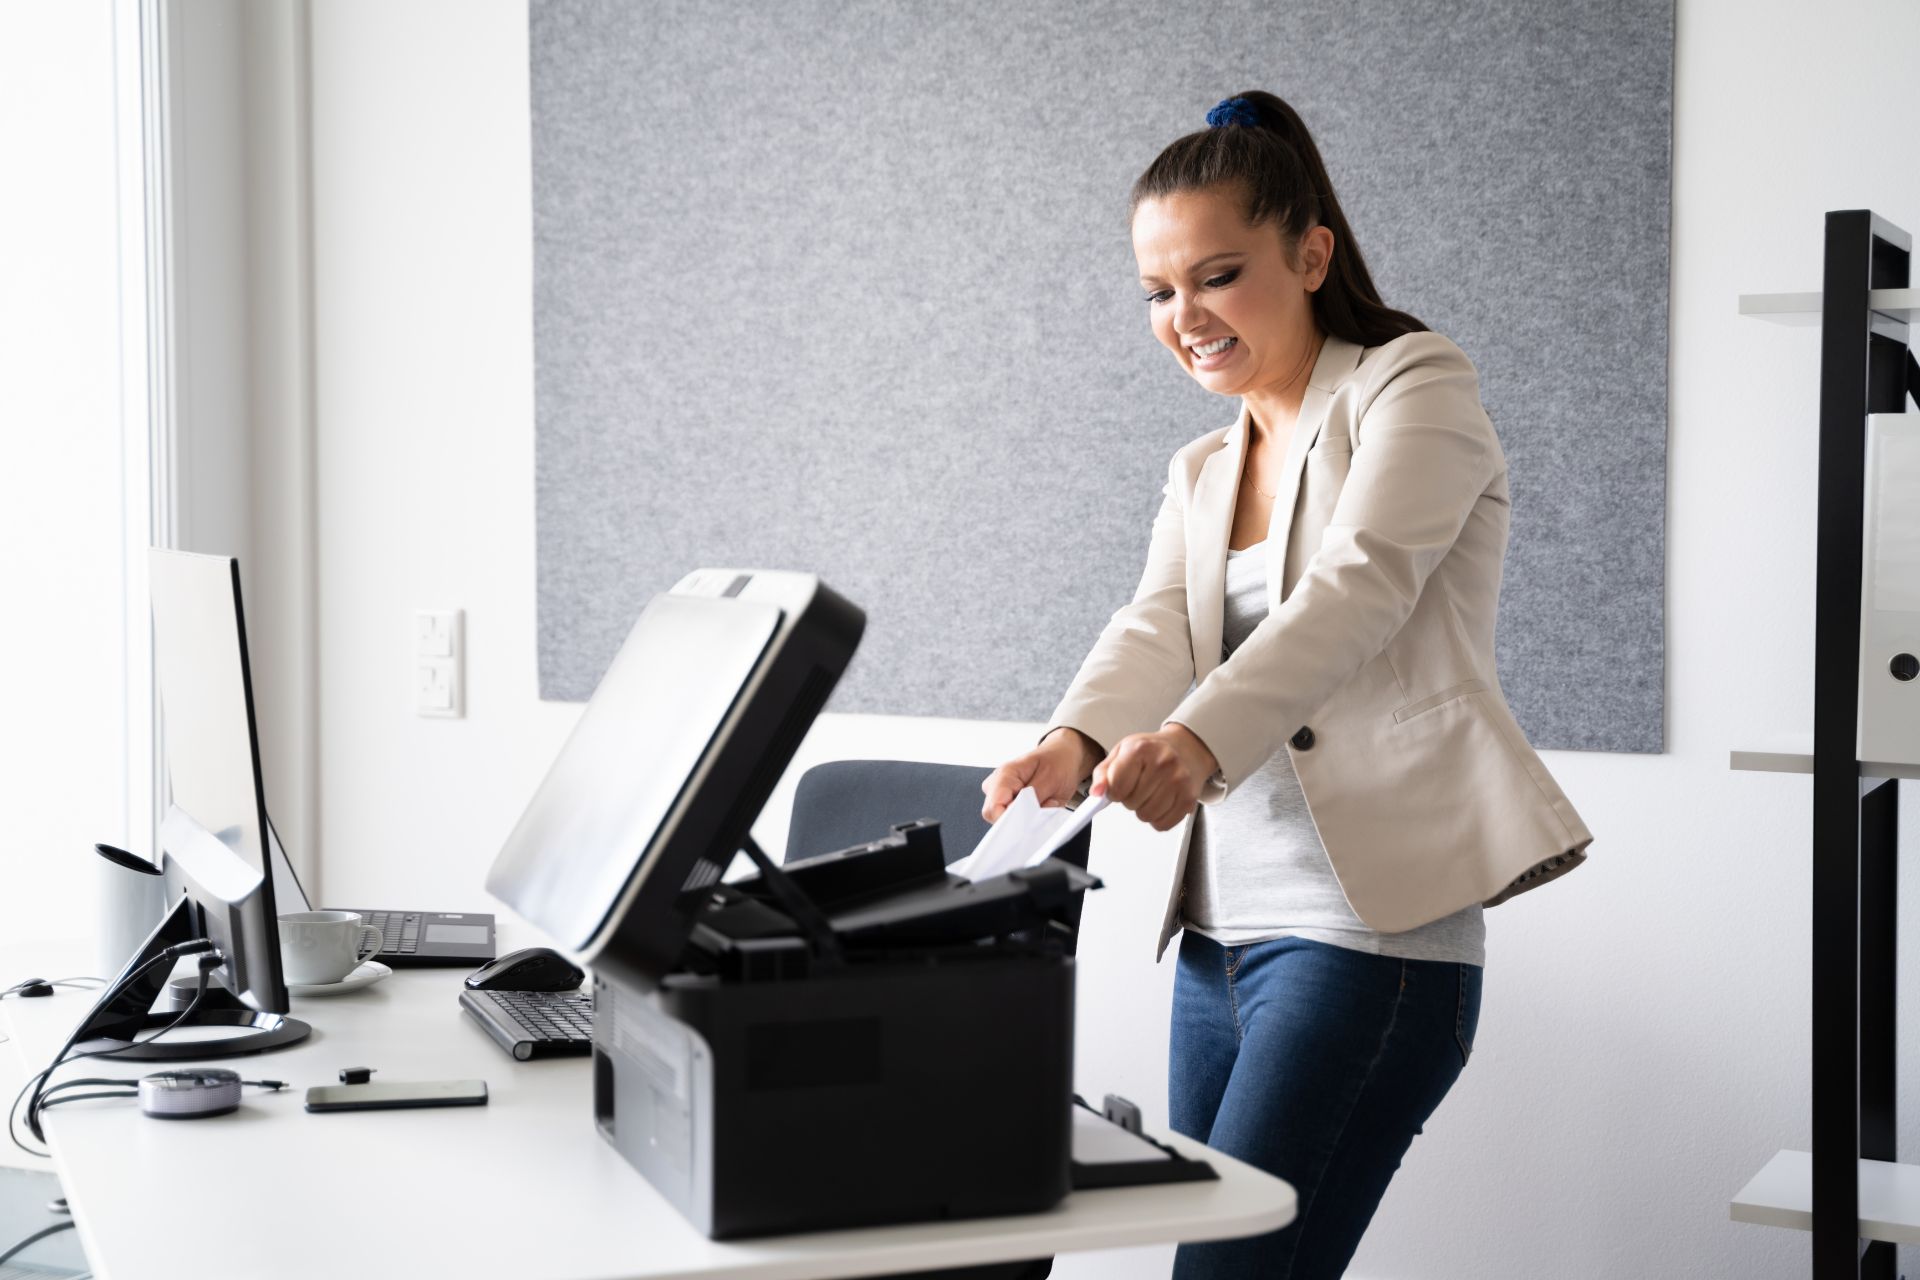 A frustrated woman pulls a piece of paper from a black printer